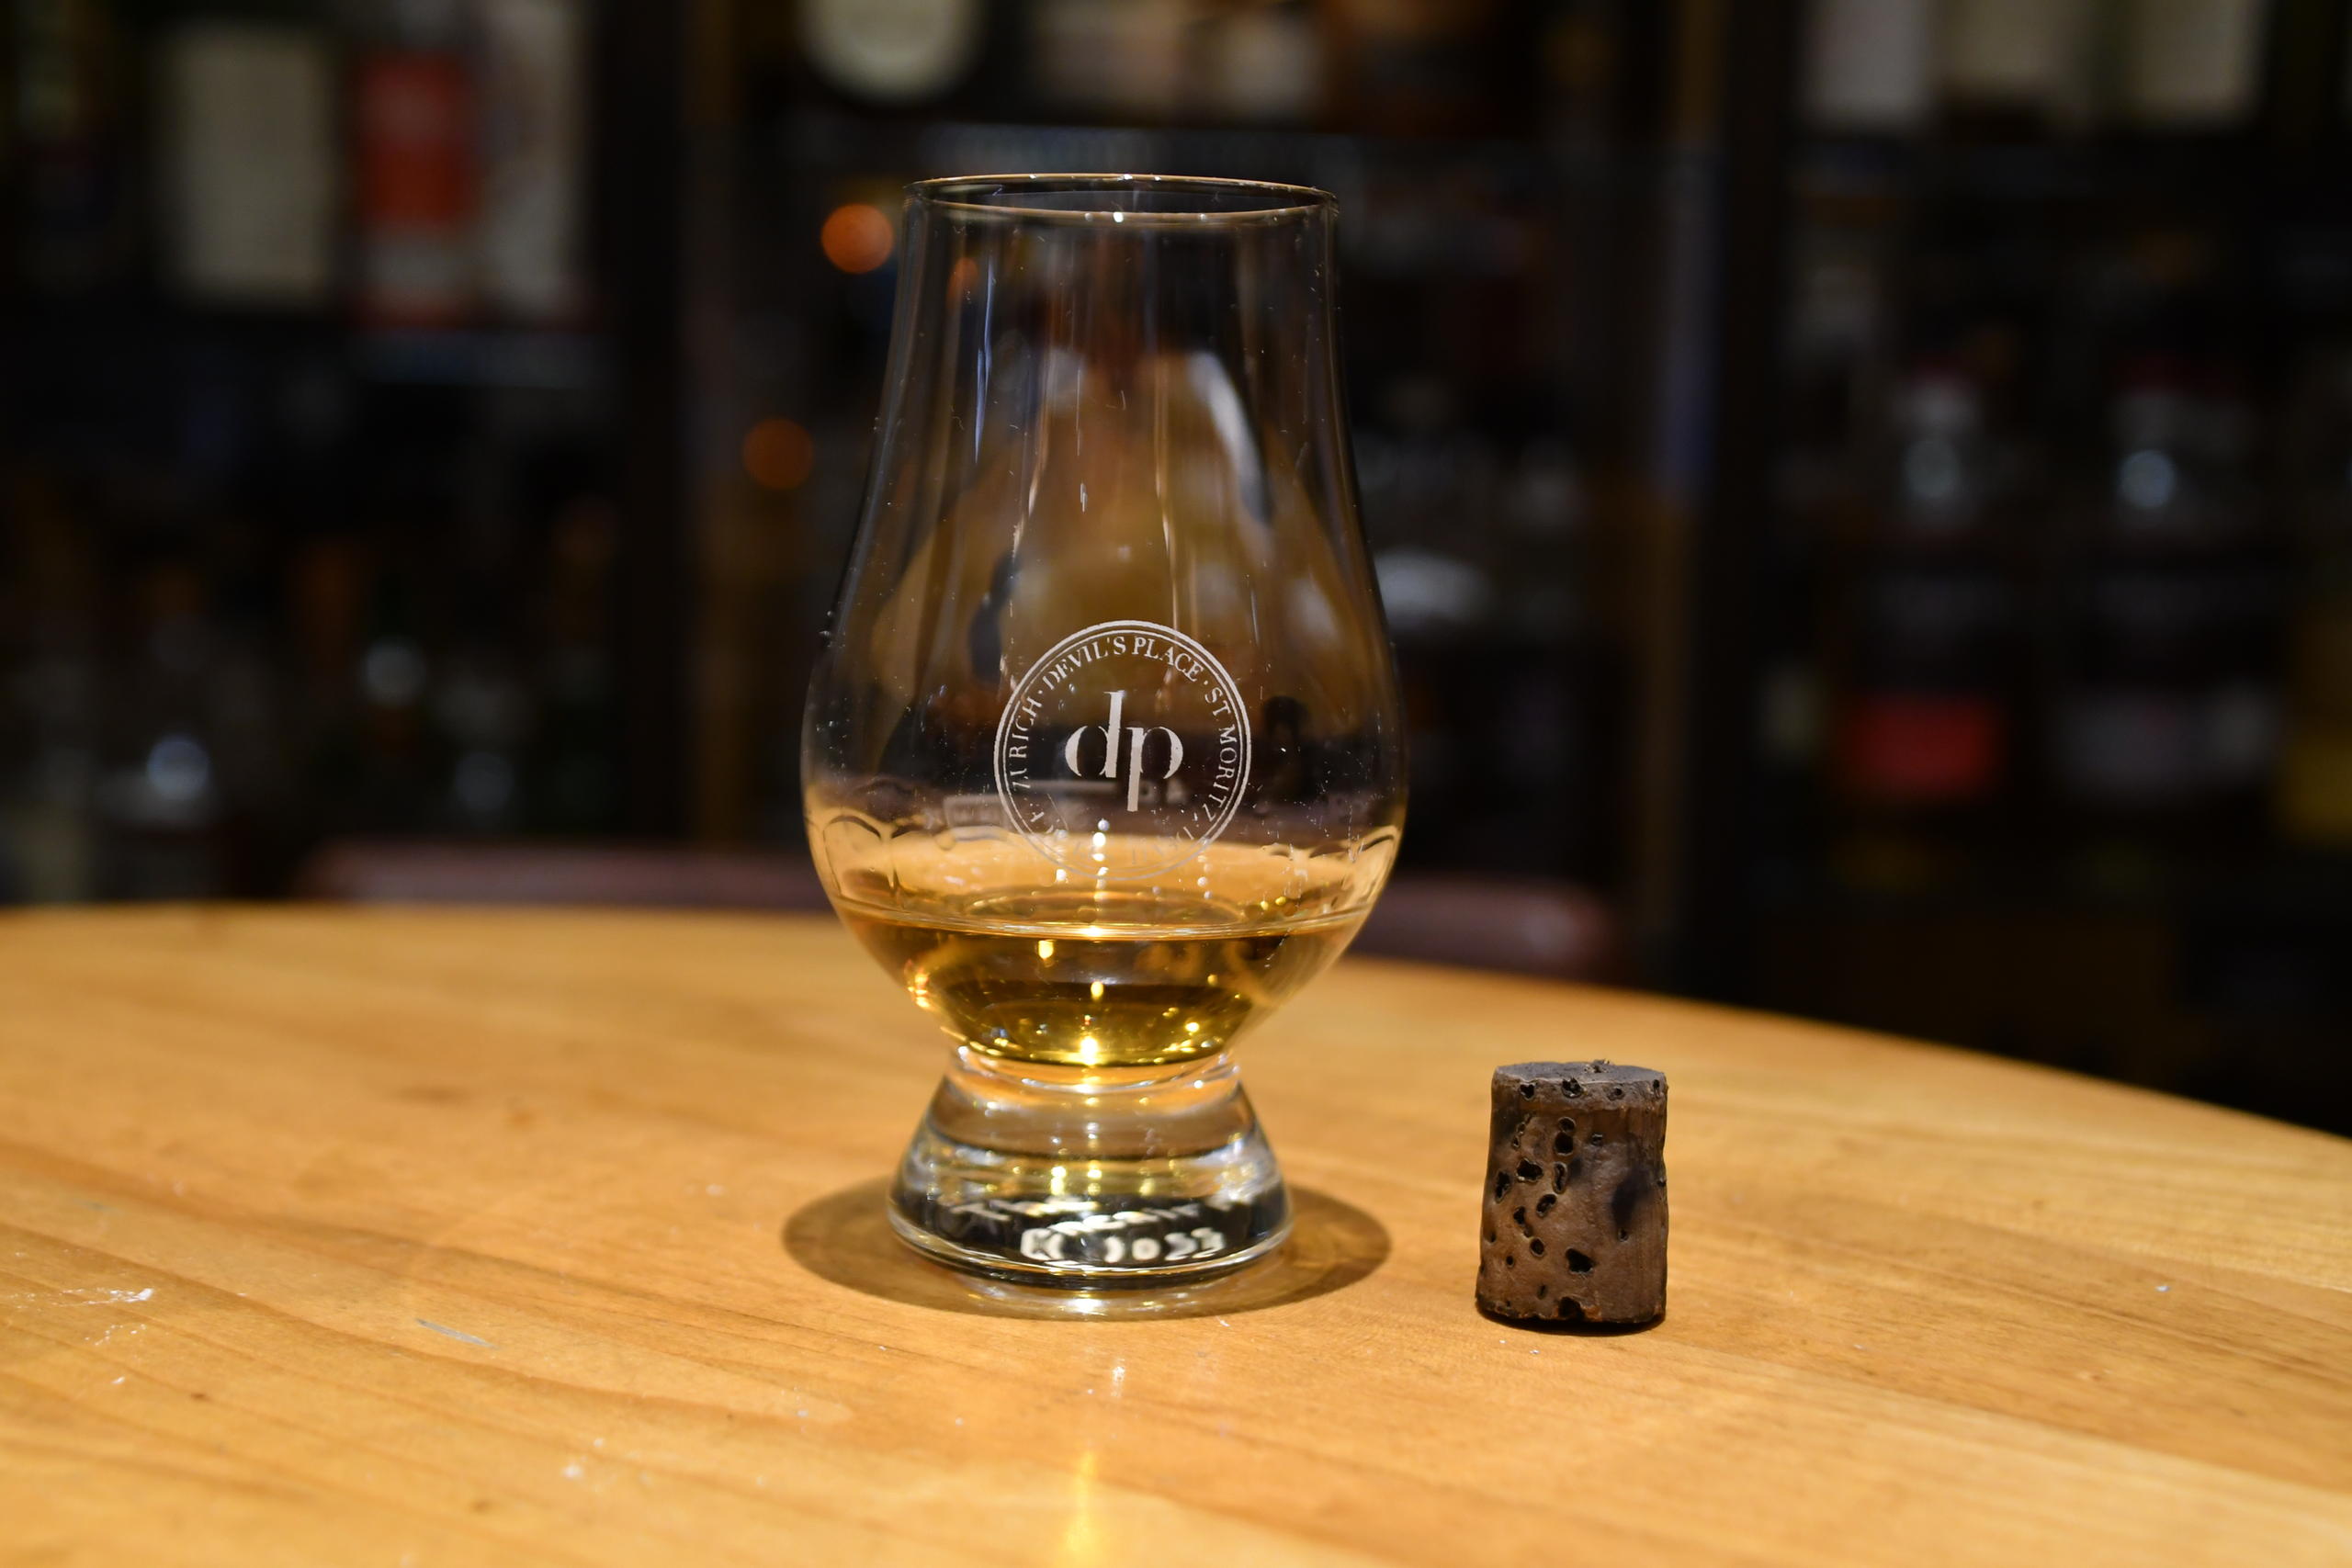 glass of whisky